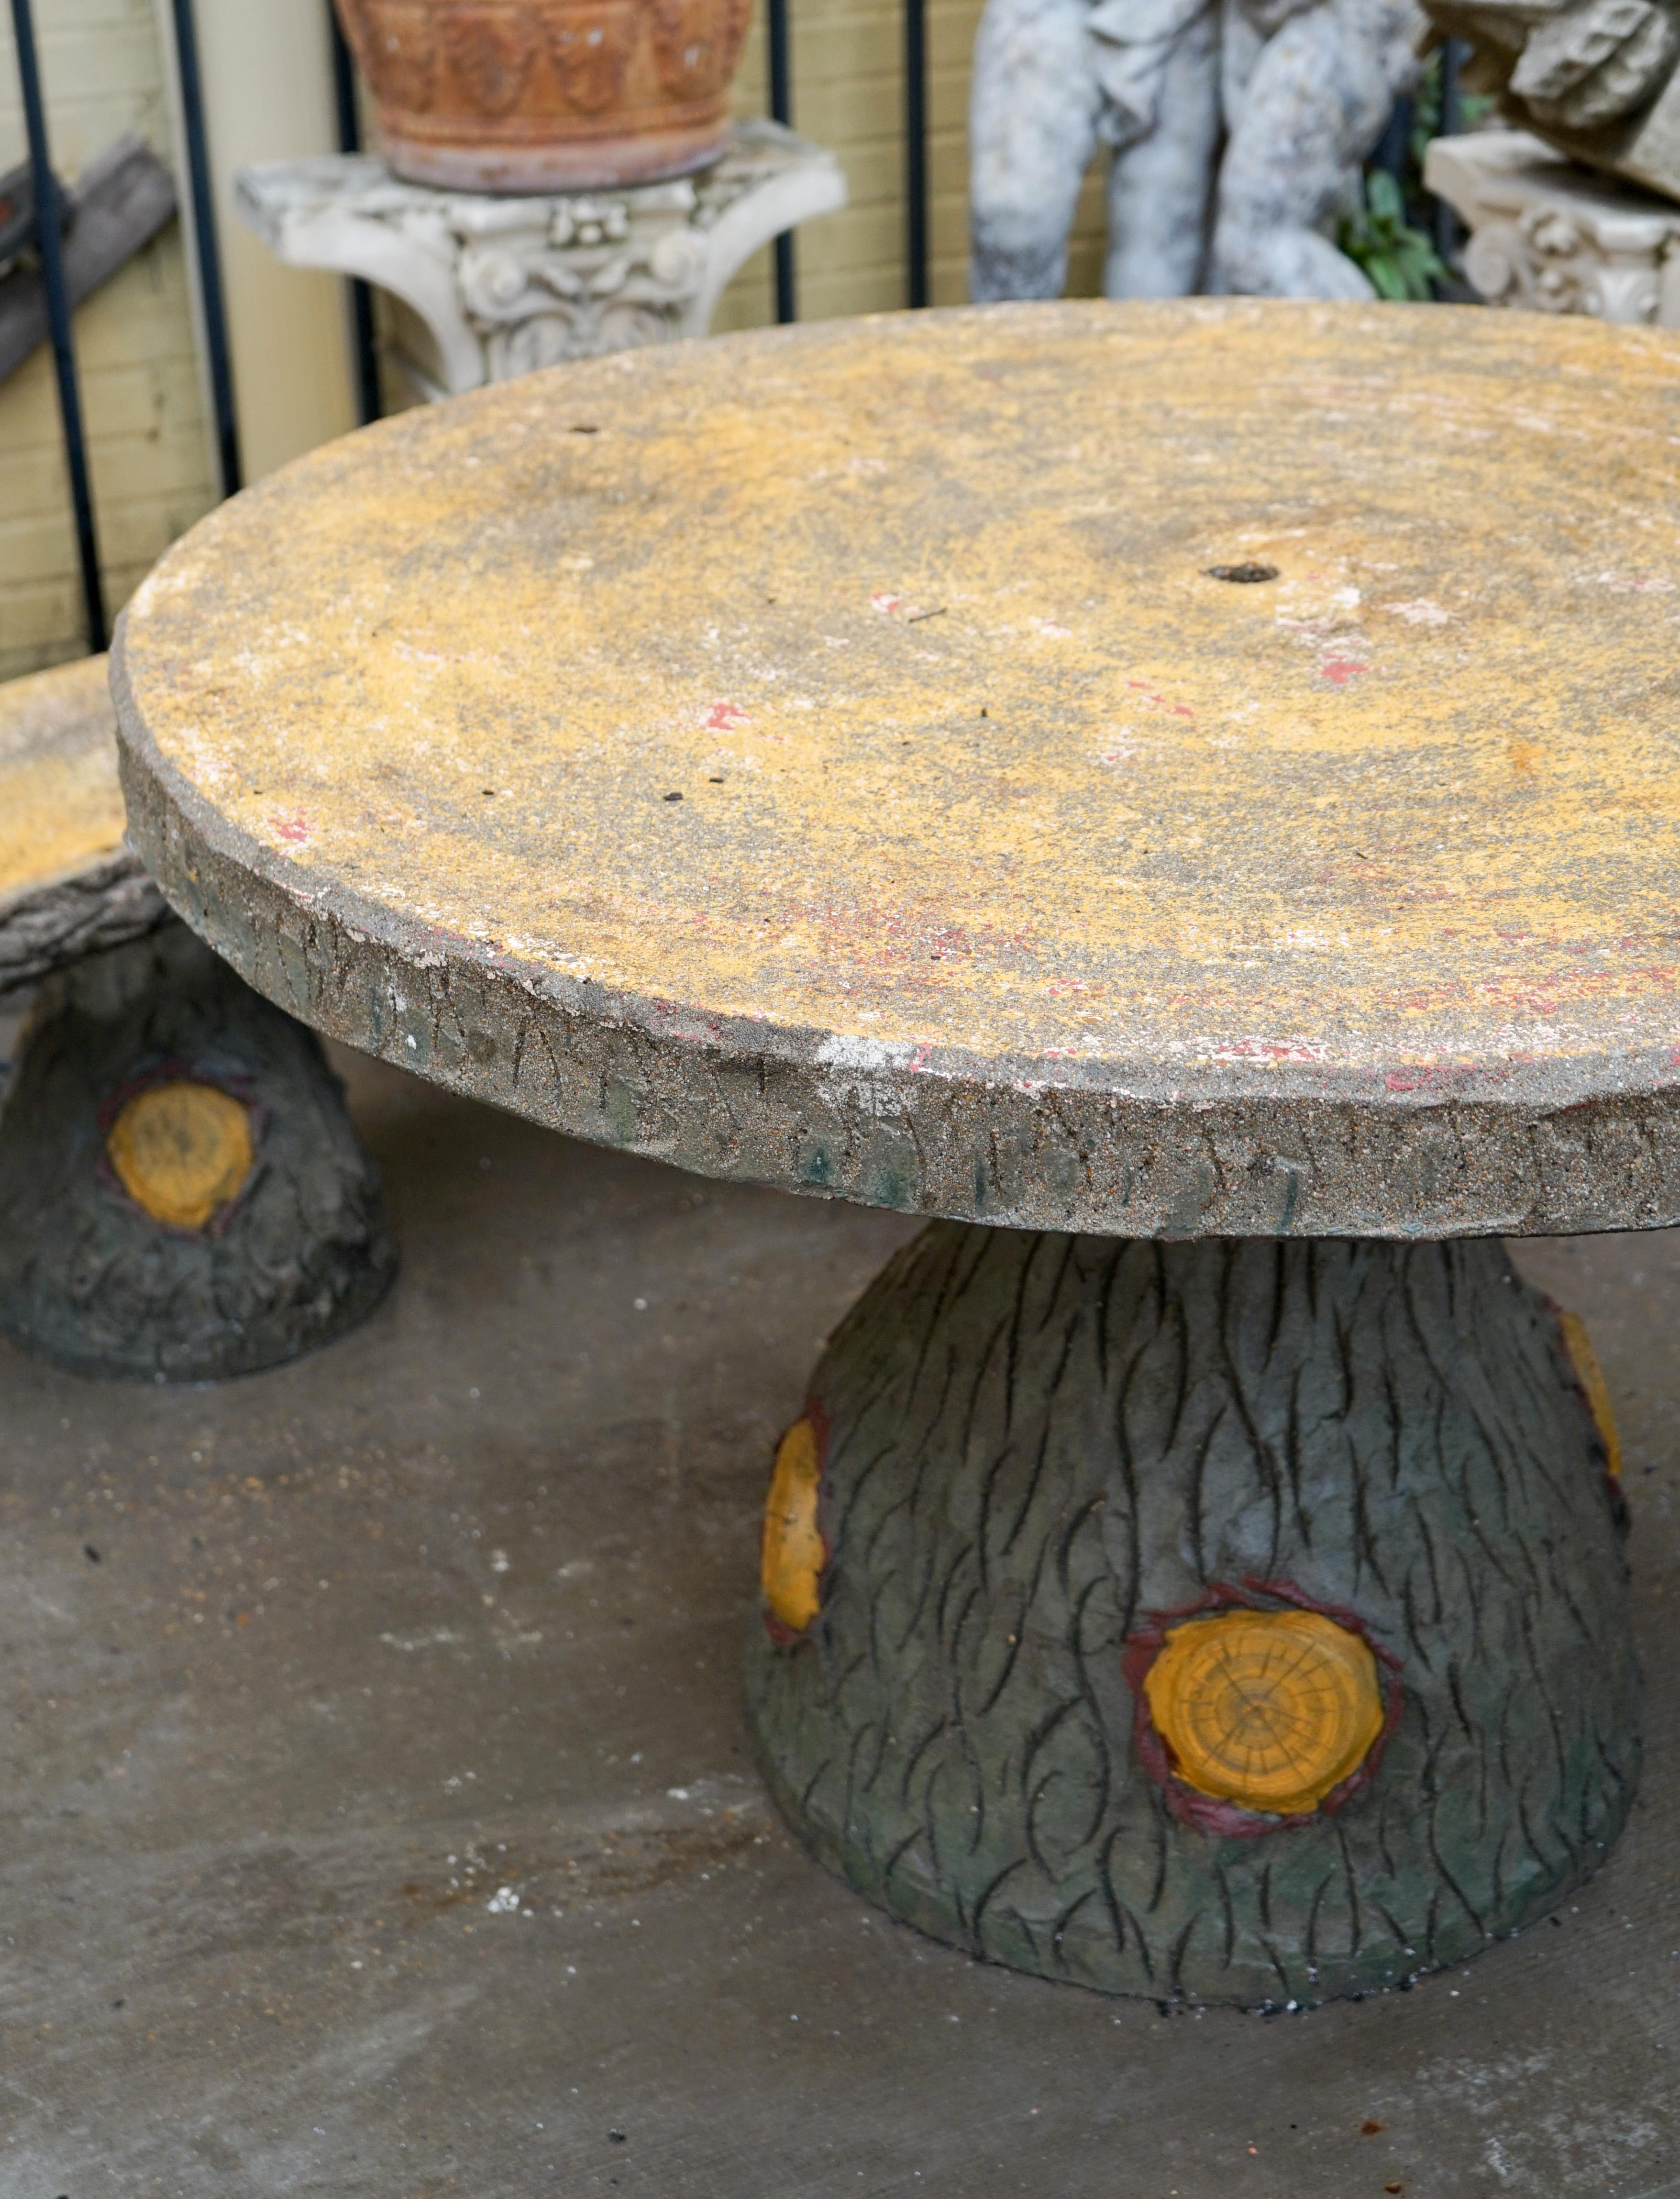 Faux bois table and bench set of mixed aggregate materials. Hand worked details on the bases in tree trunk form, topped with concrete tabletop and seat tops. Painted finish, midcentury, imported from France.

Measurements:

Tabletop diameter